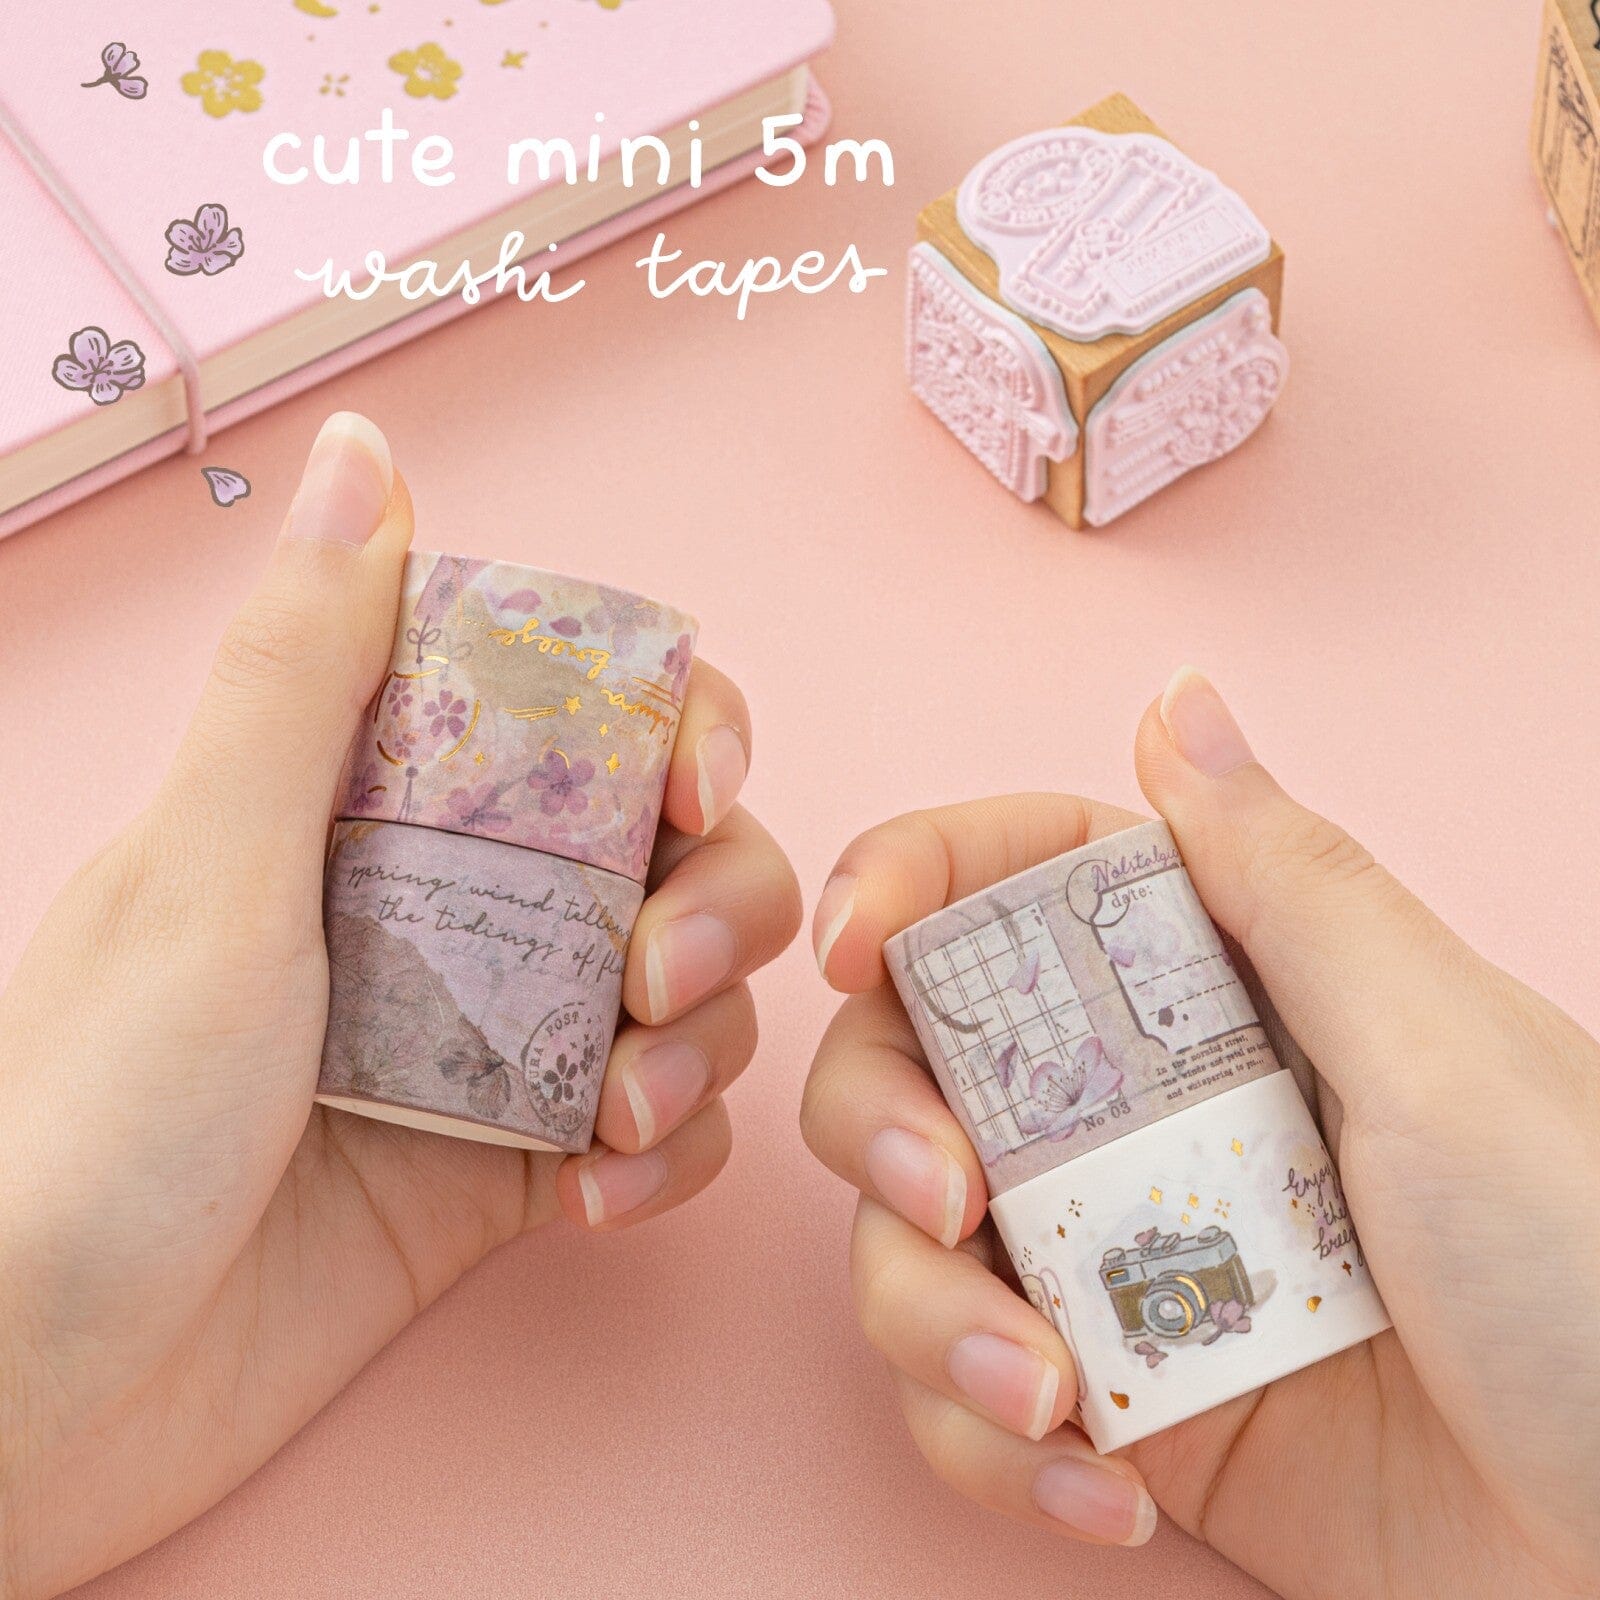 Hands holding 4x sakura themed washi tape rolls and text cute mini 5m washi tapes